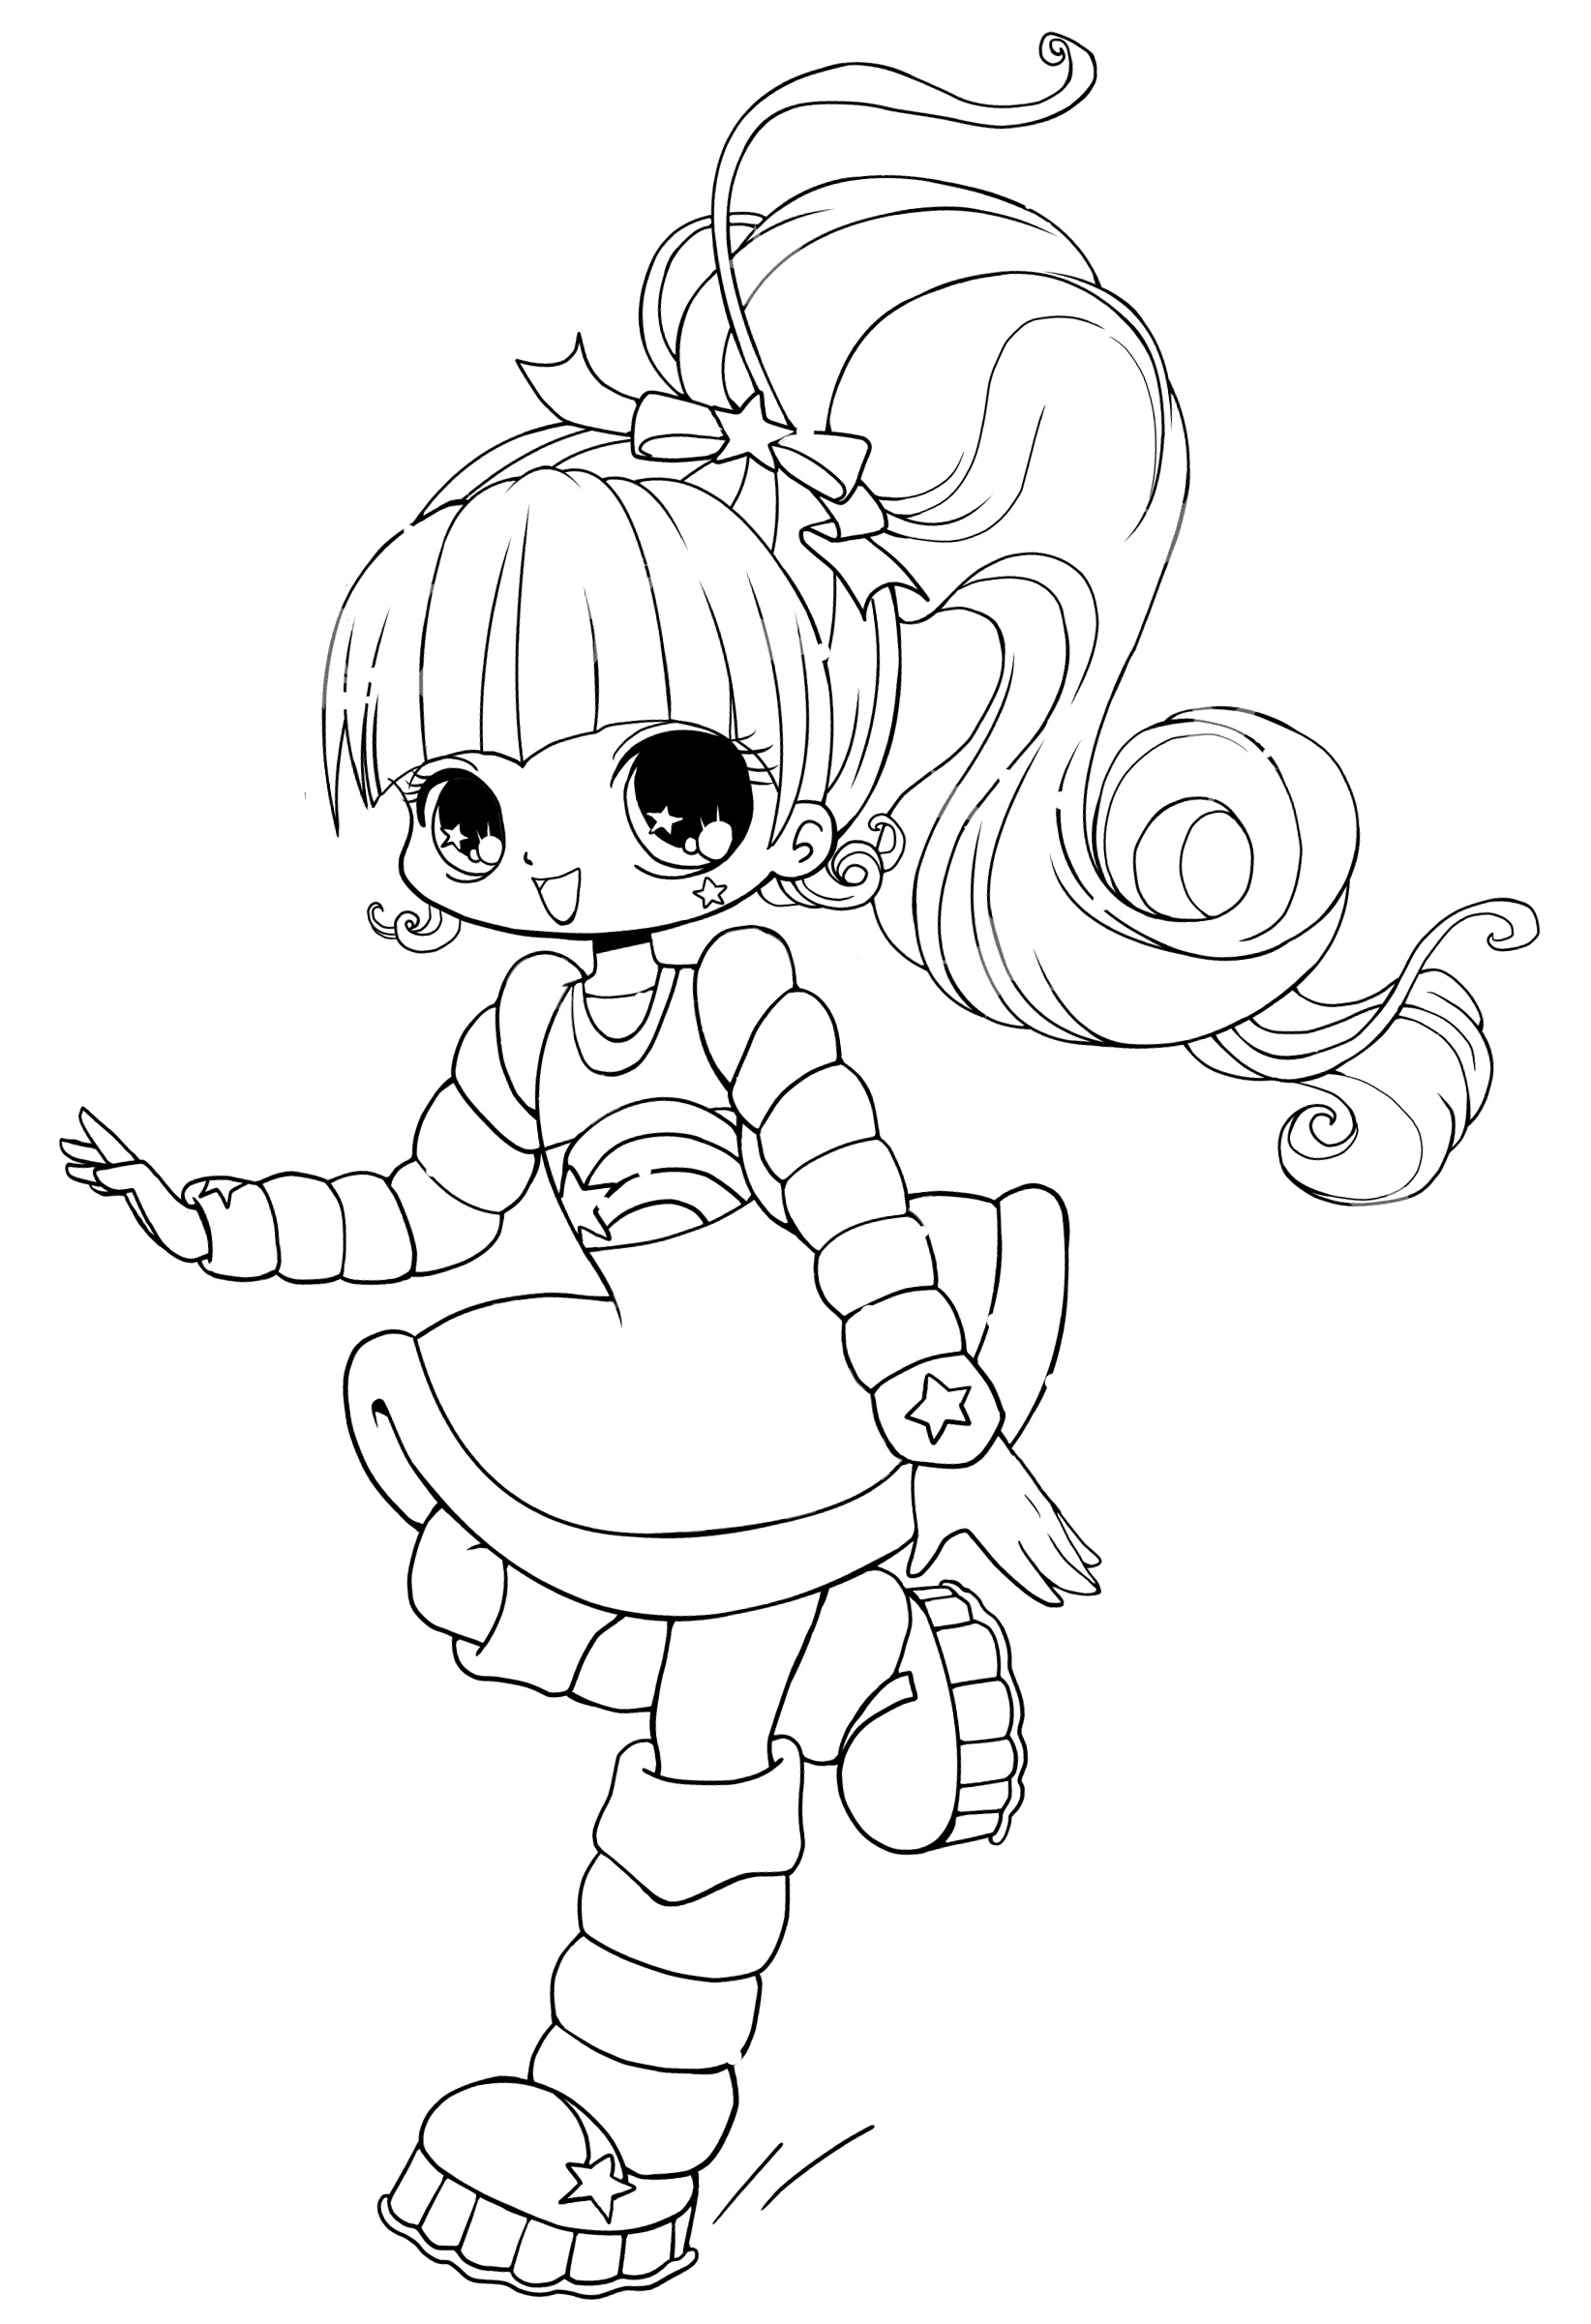 manga girl coloring pages